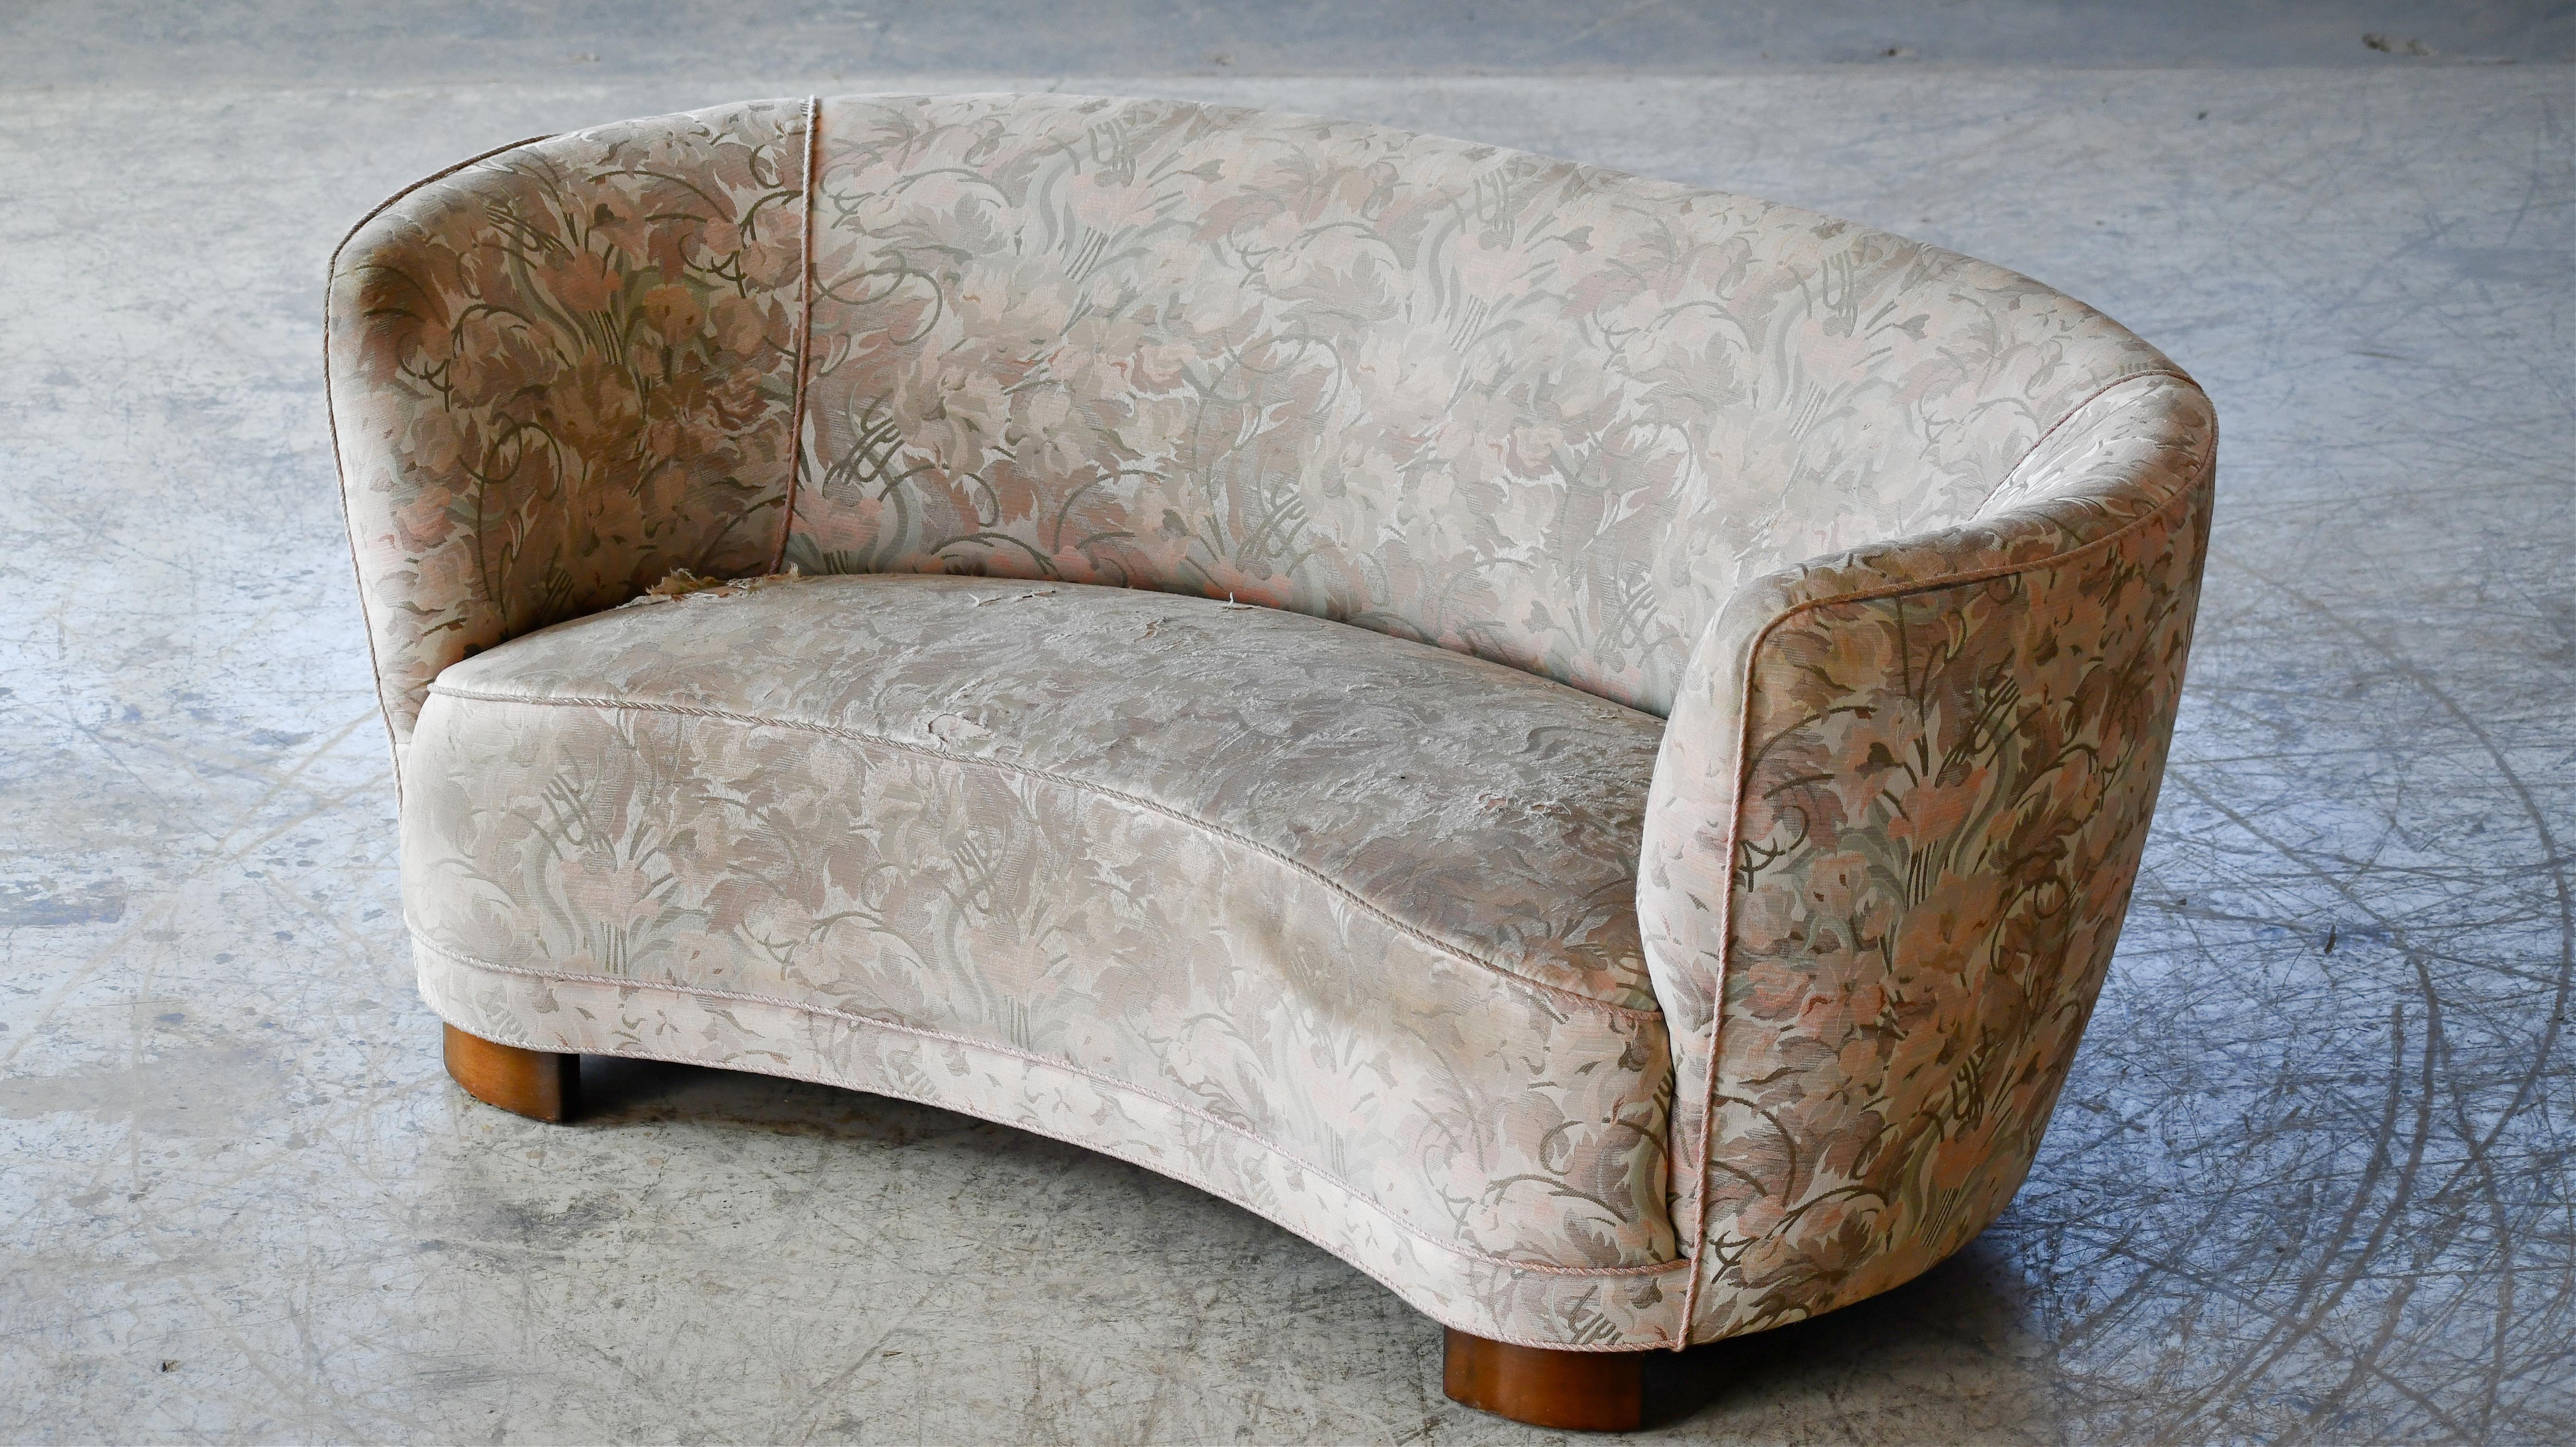 Viggo Boesen style banana shaped or curved Loveseat made in Denmark, around late 1930s or early 1940s. This small sofa will make a strong statement in any room. Beautiful round voluptuous lines and solid thick legs. The original fabric is still